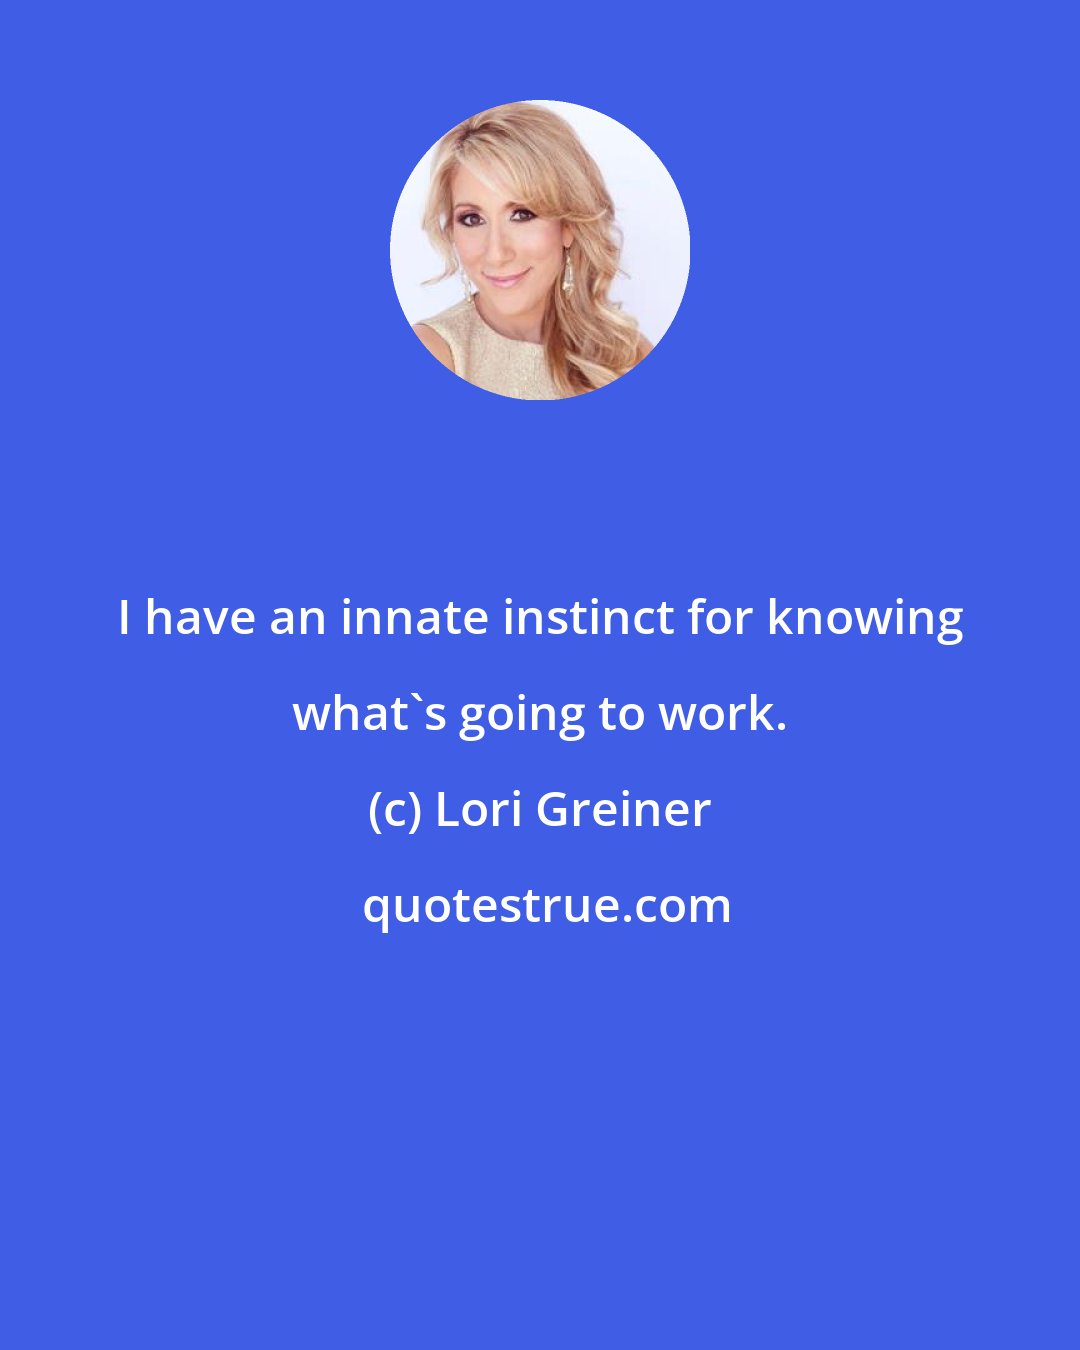 Lori Greiner: I have an innate instinct for knowing what's going to work.